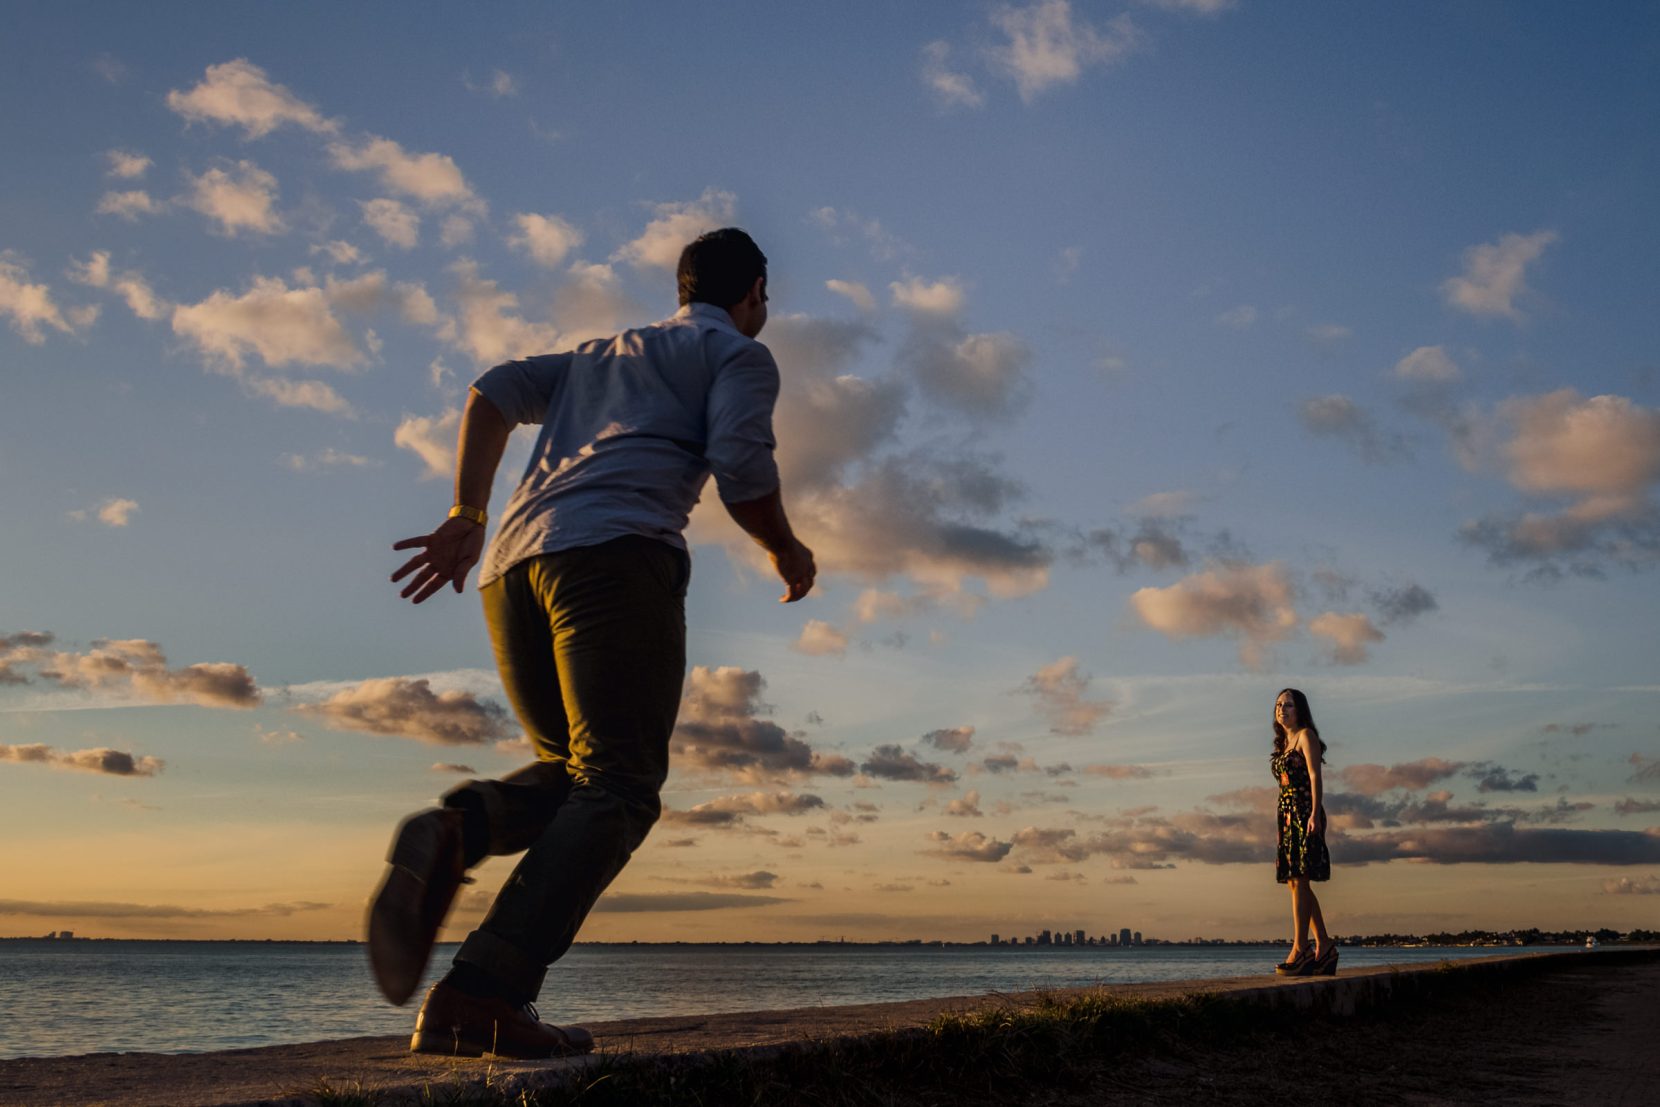 man running to girl along beach in miami during sunset clouds city